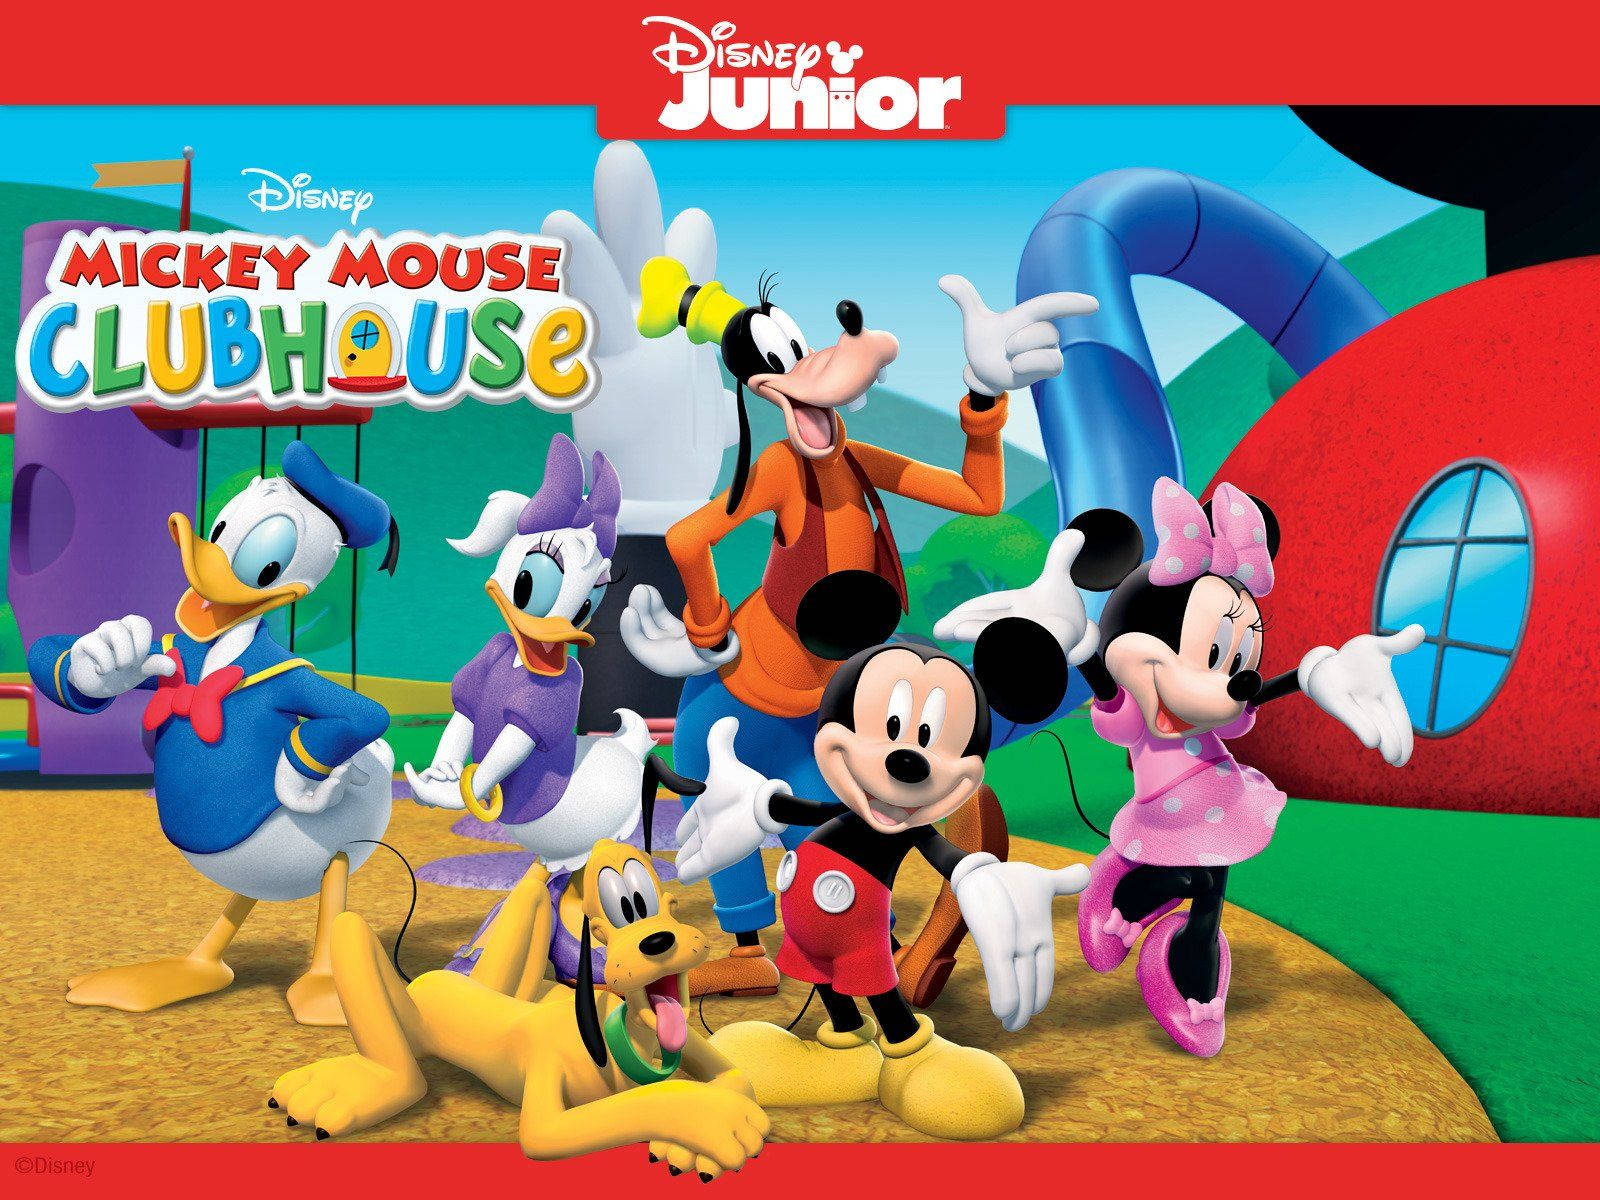 Mickey Mouse Clubhouse Disney Junior Poster Wallpaper